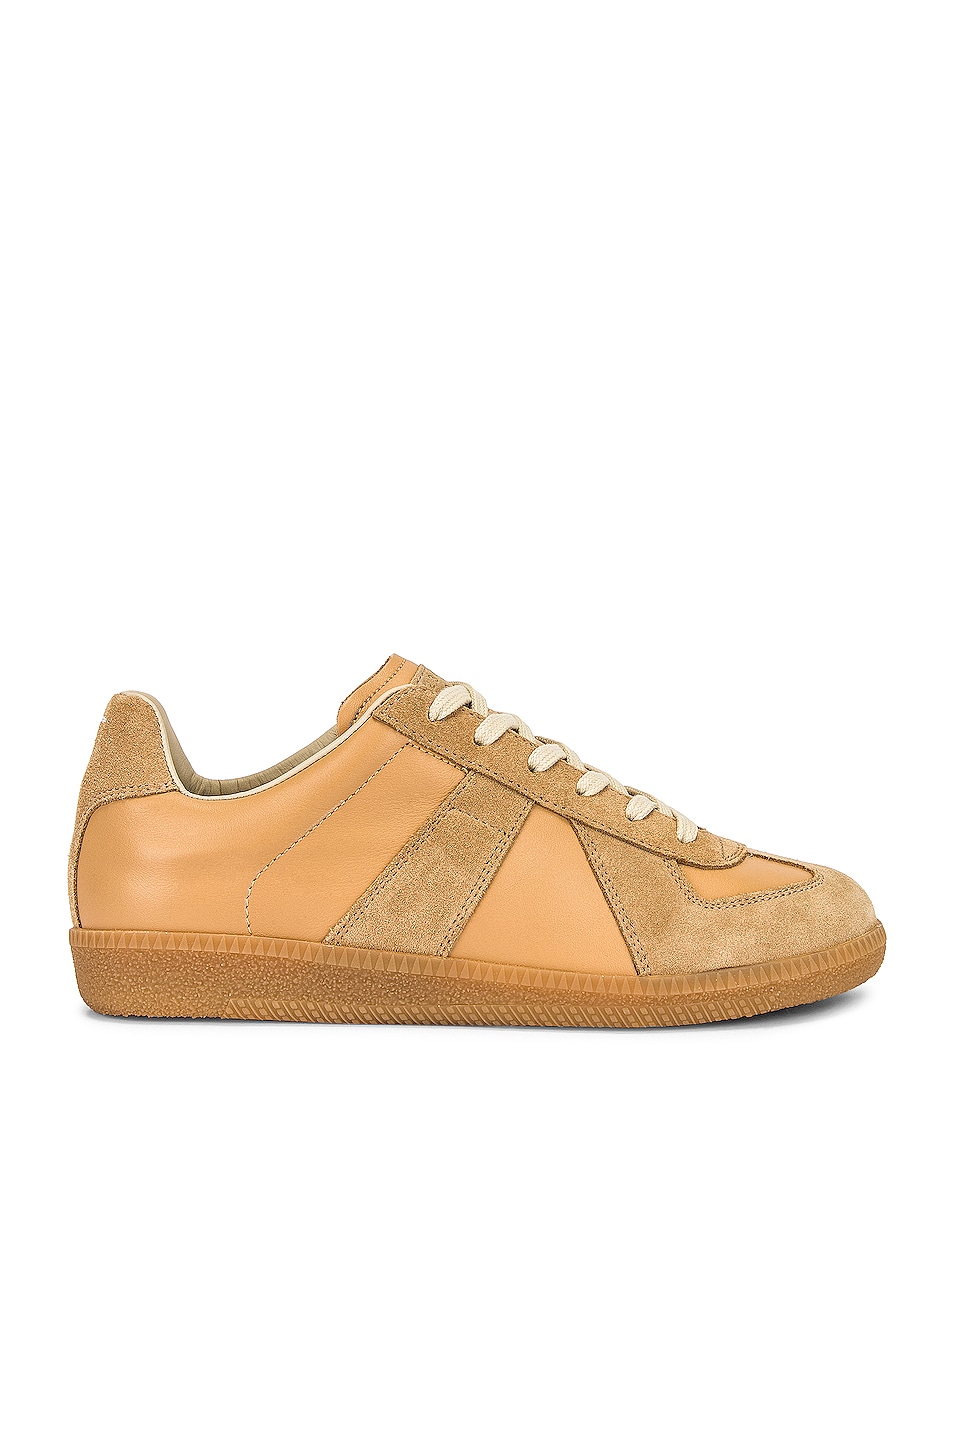 Image 1 of Maison Margiela Replica Sneakers in Sand & Croissant